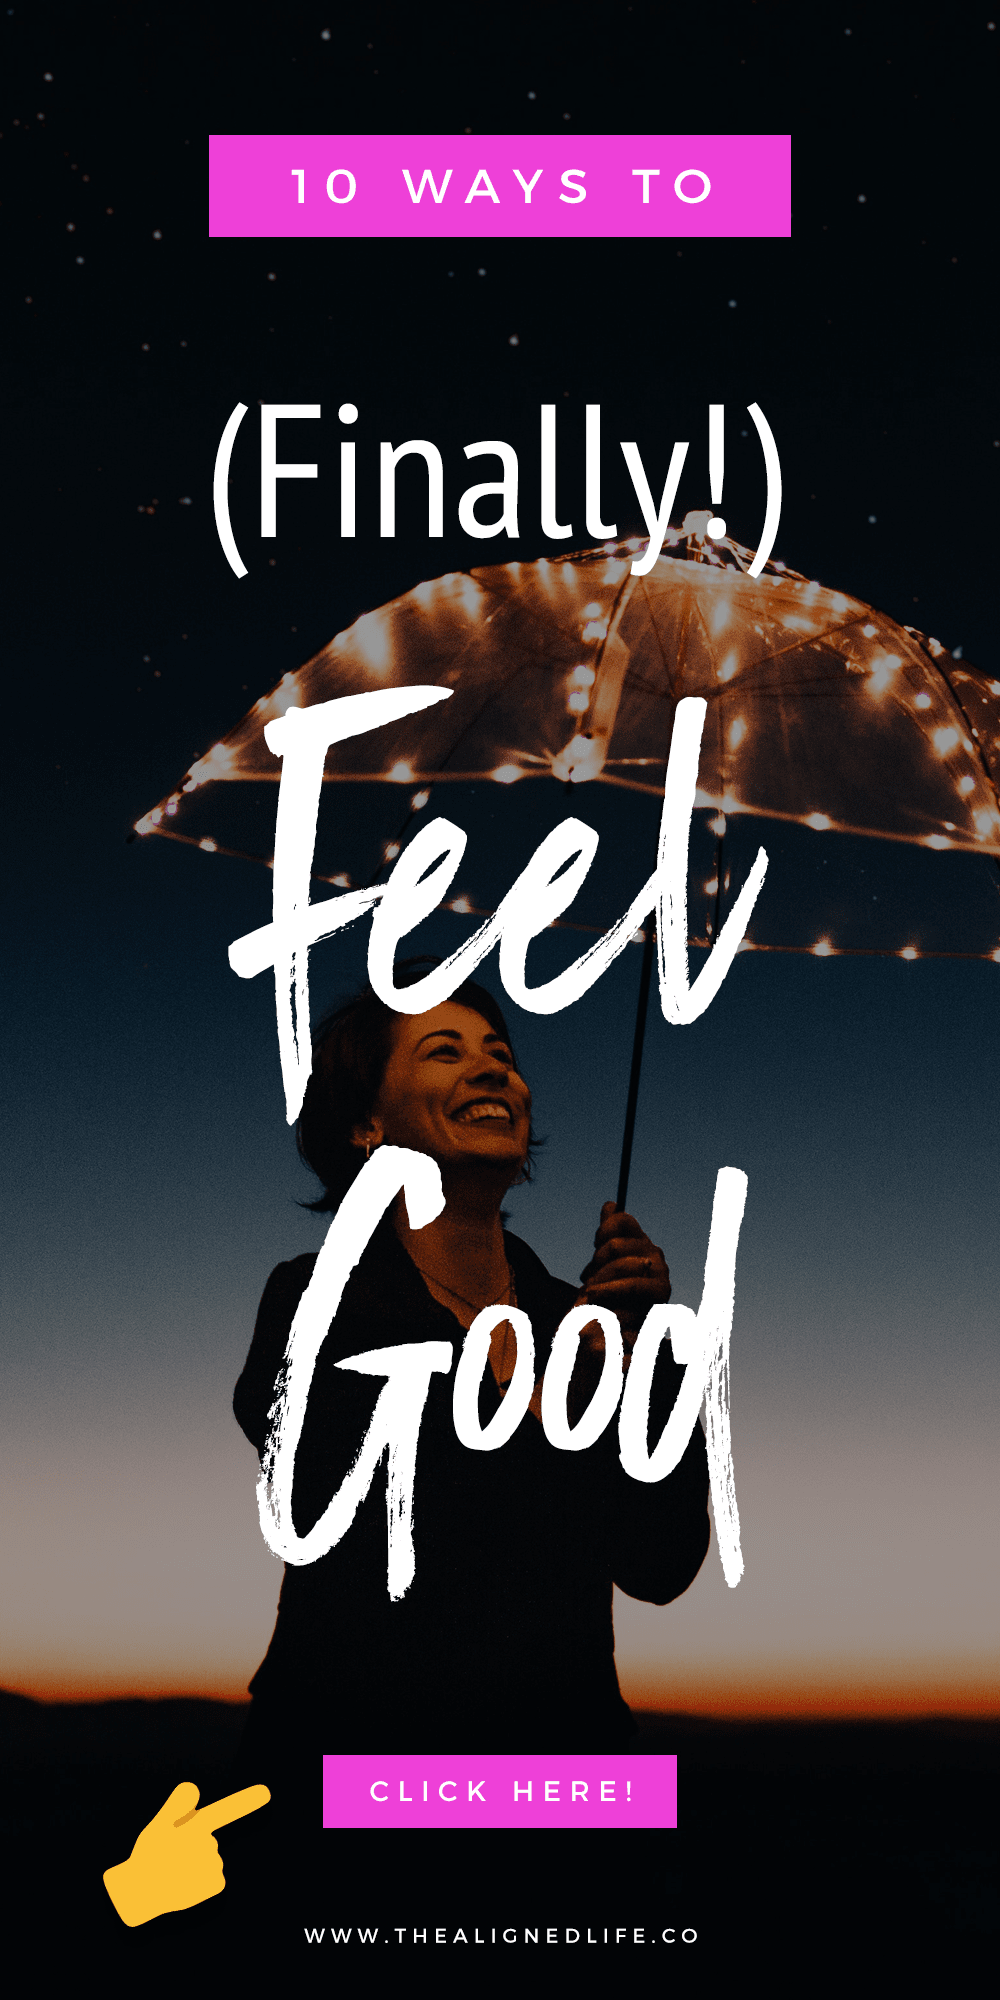 How To (Finally!) Feel Good